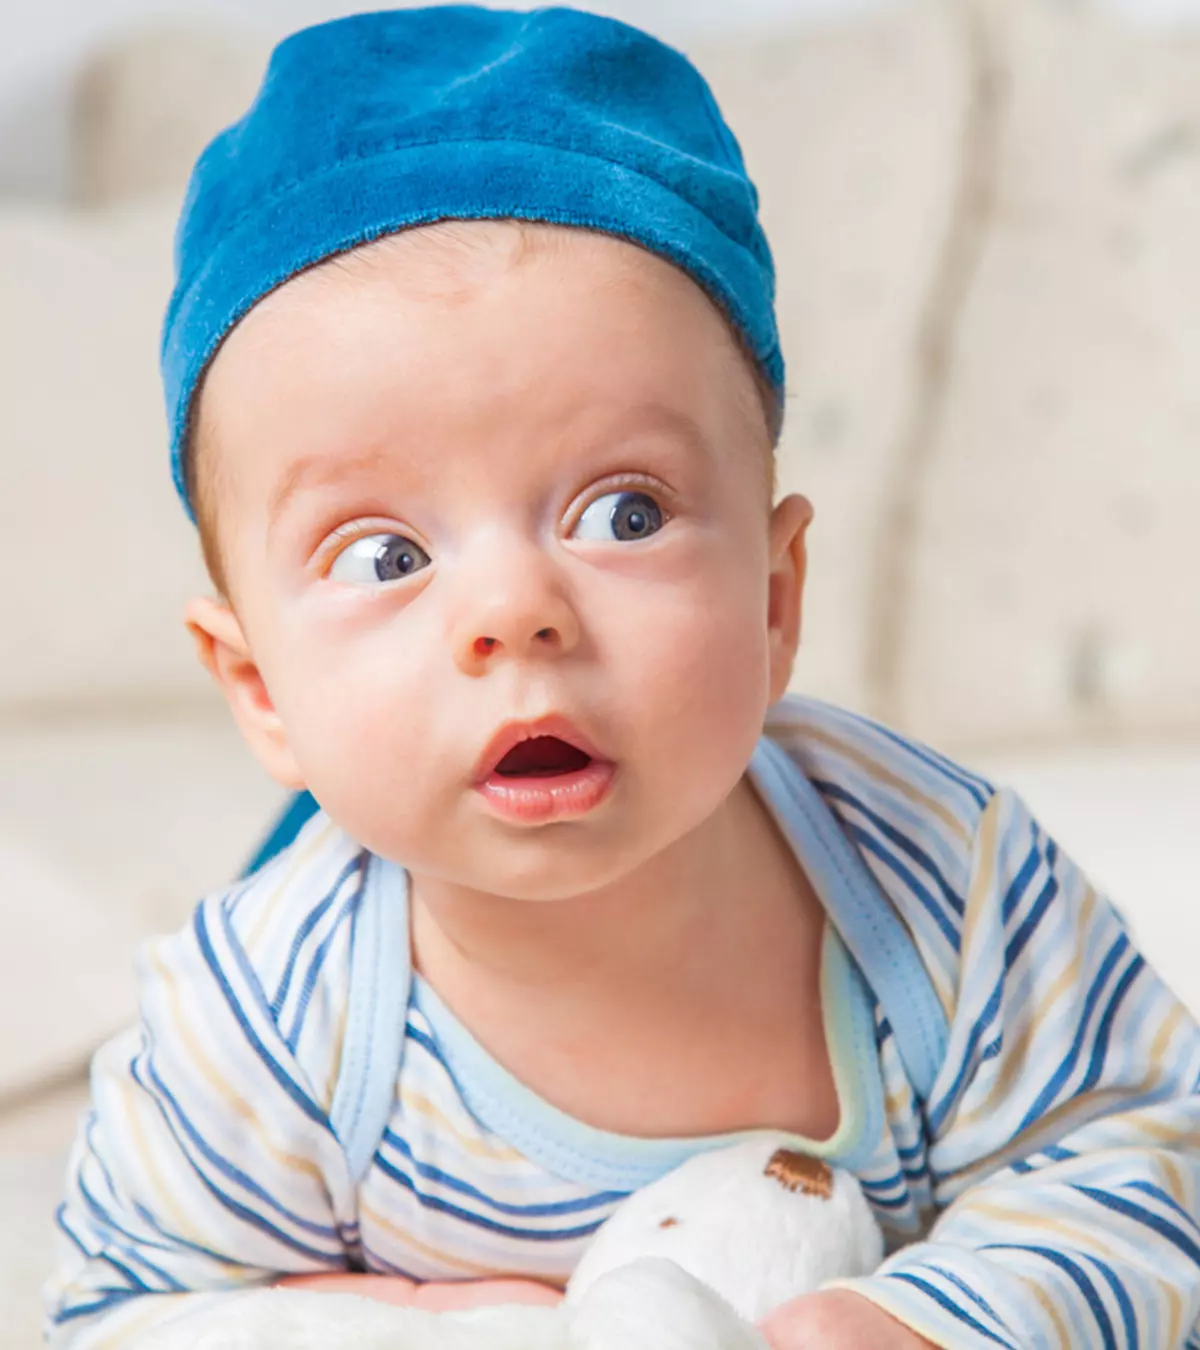 Baby Rolling Eyes: Causes, Symptoms, And When To See A Doctor